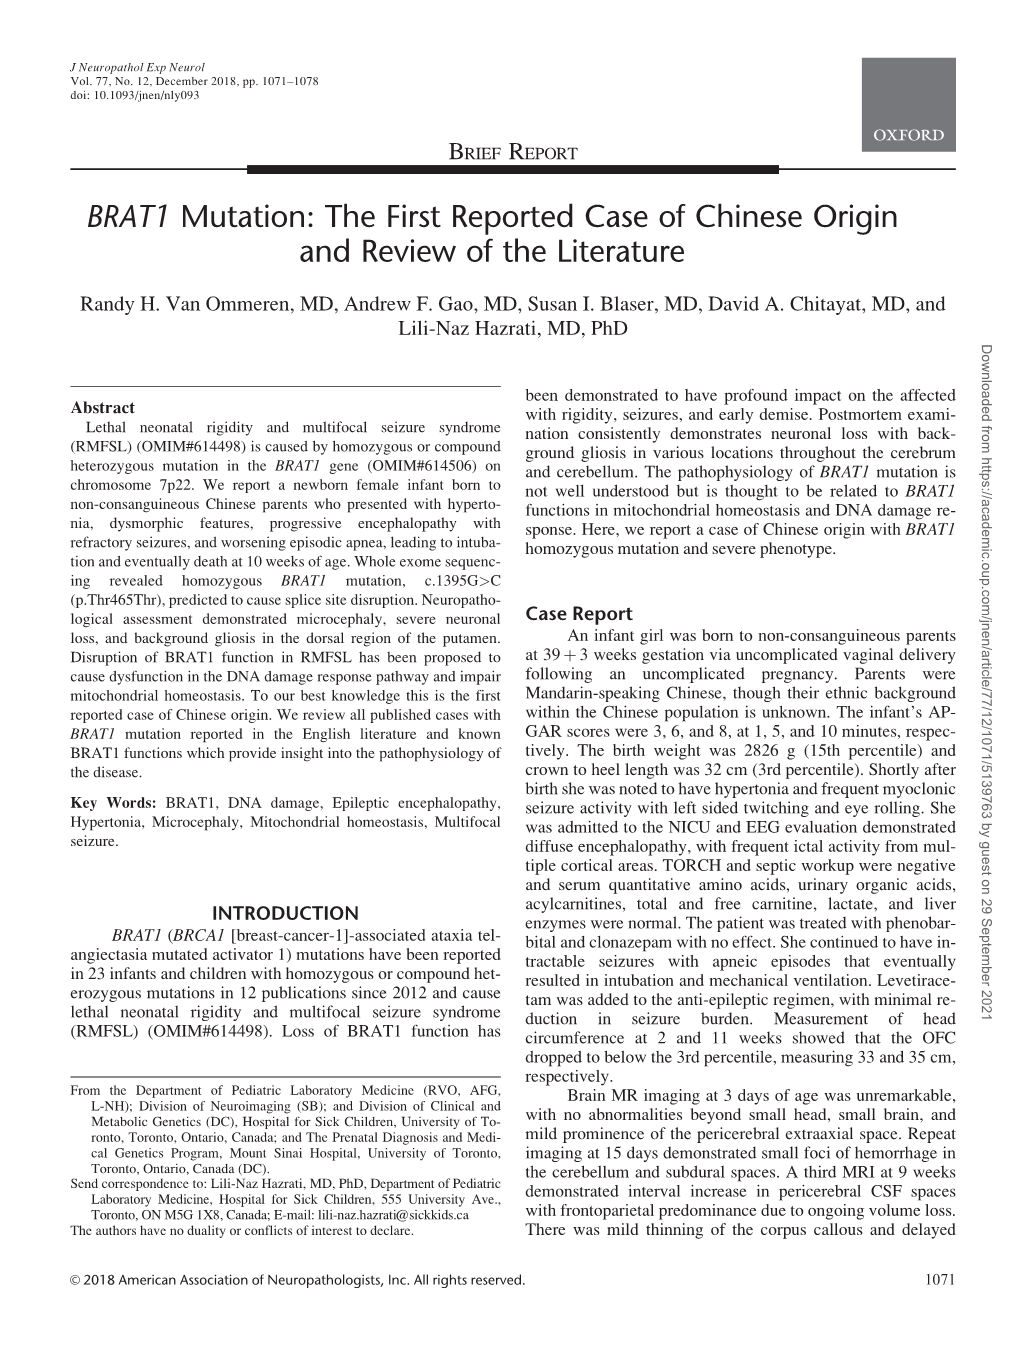 BRAT1 Mutation: the First Reported Case of Chinese Origin and Review of the Literature